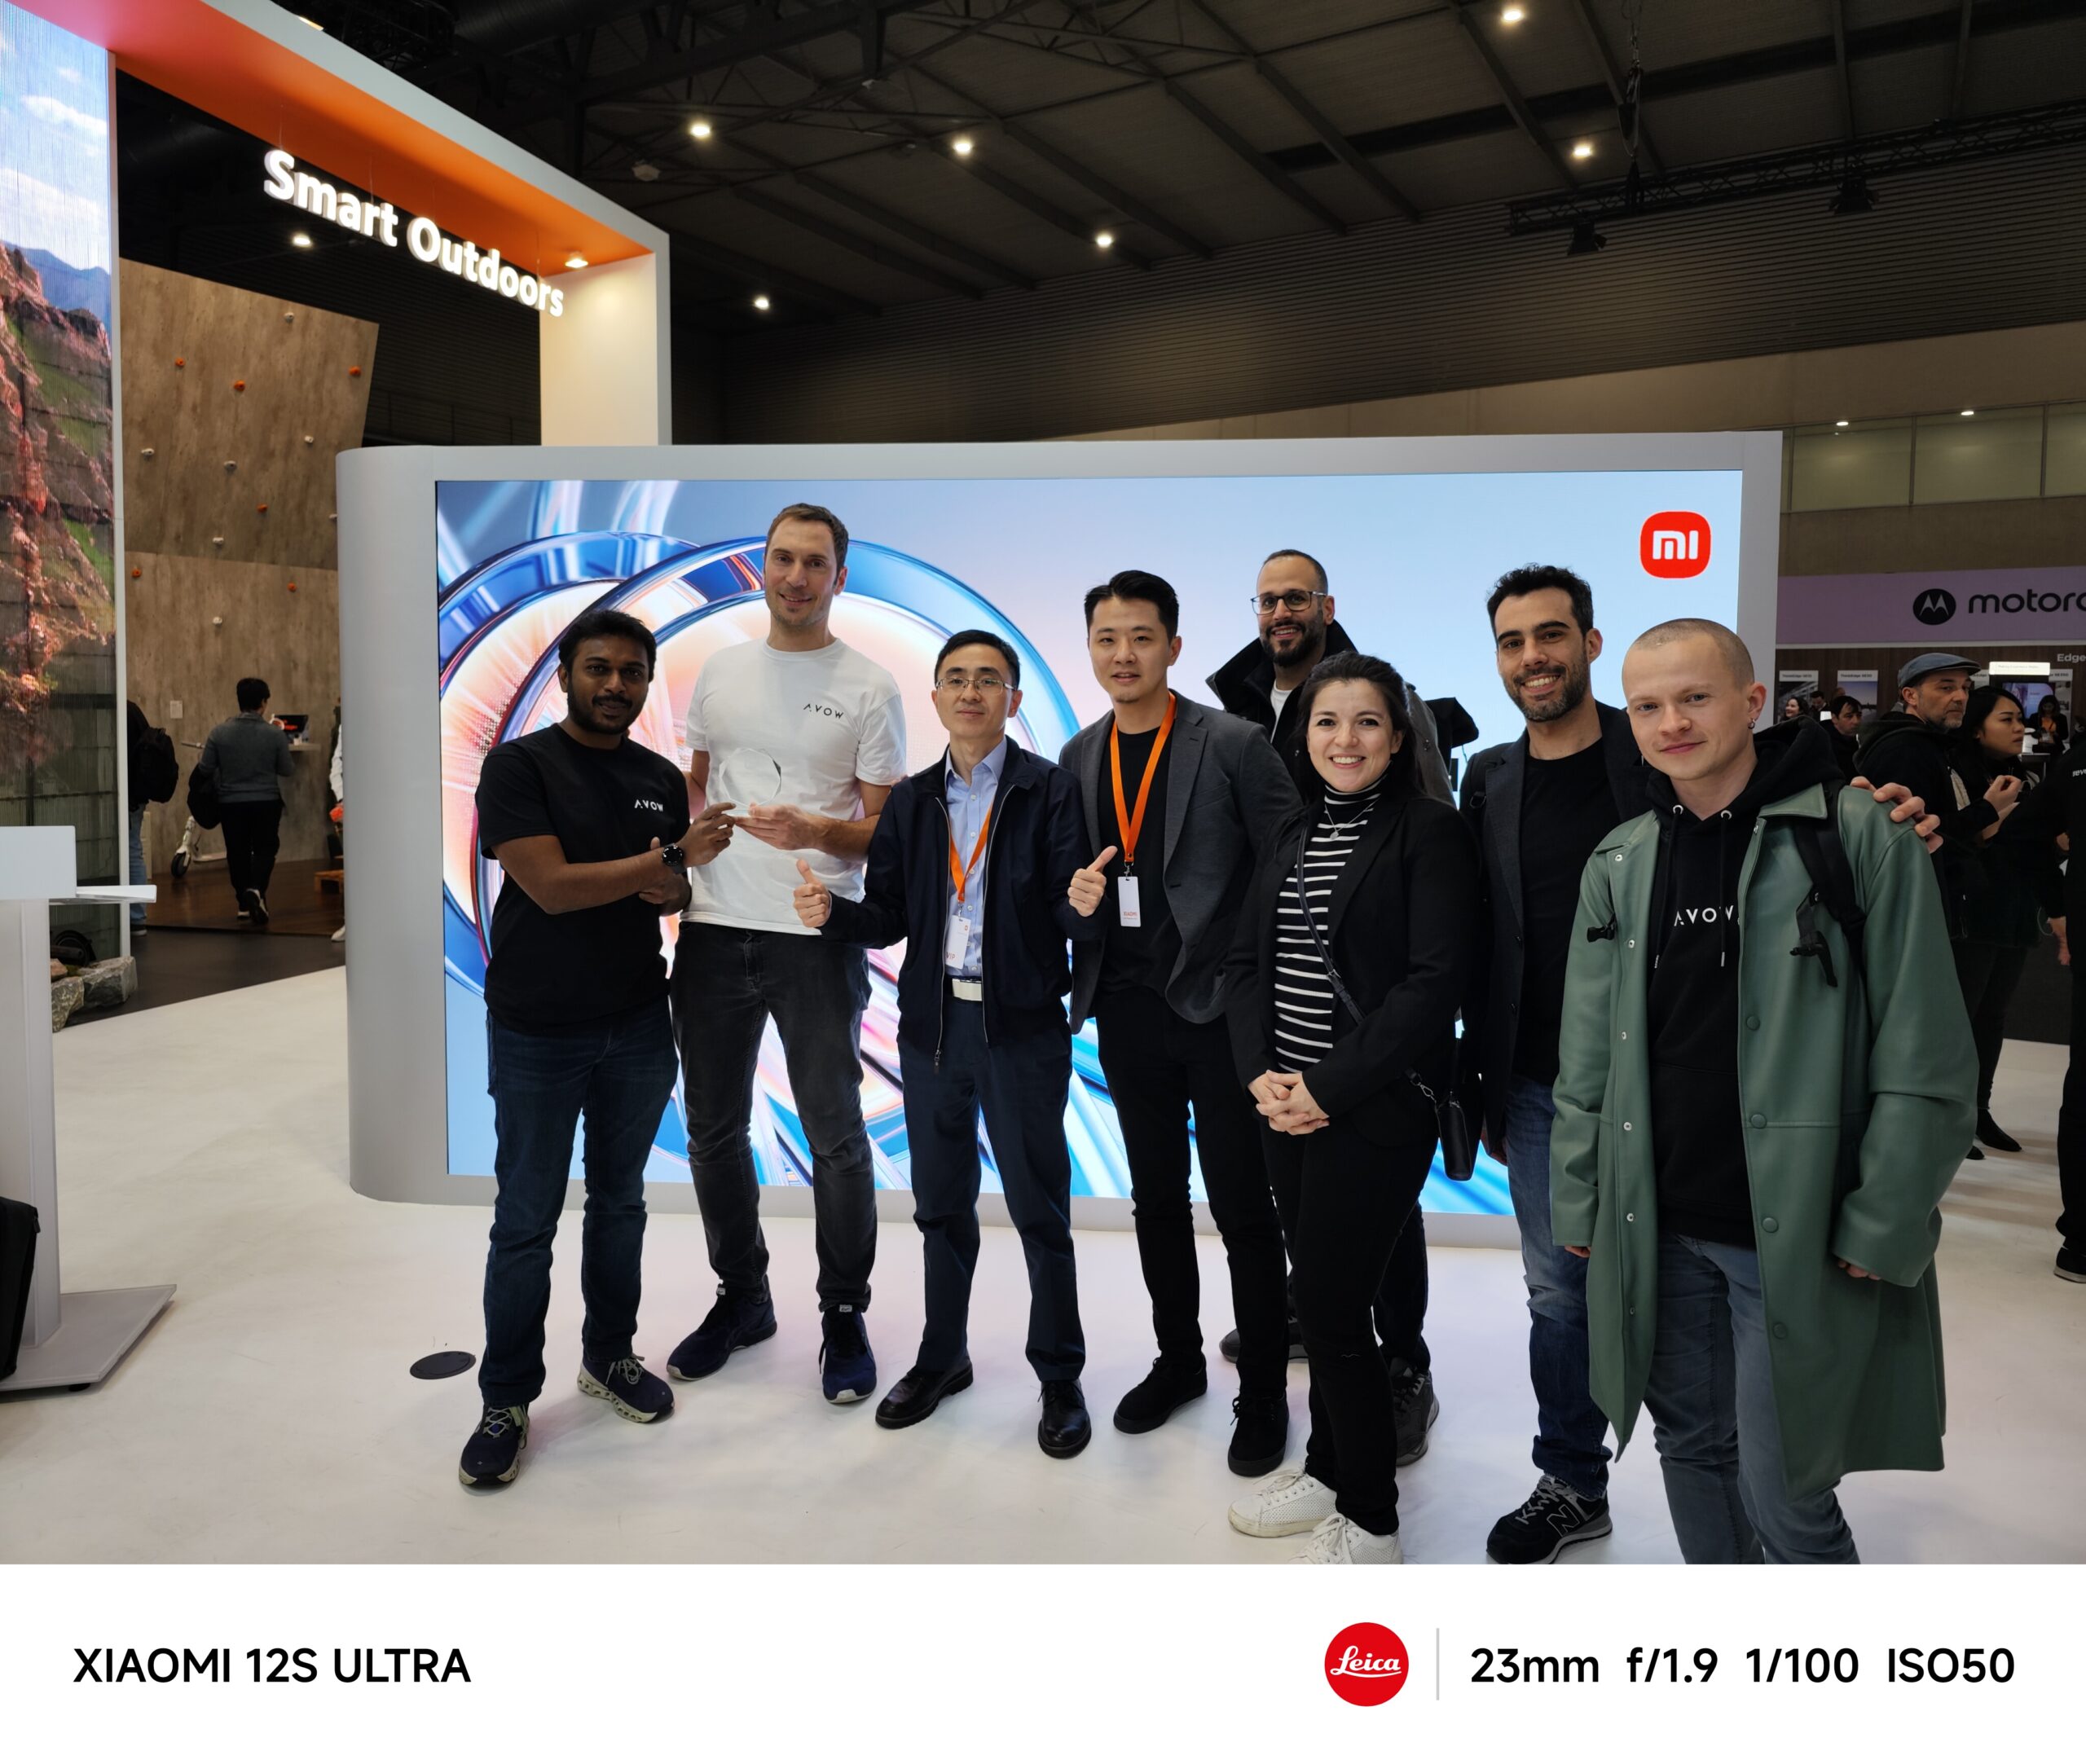 AVOW receives Core Agency from Xiaomi